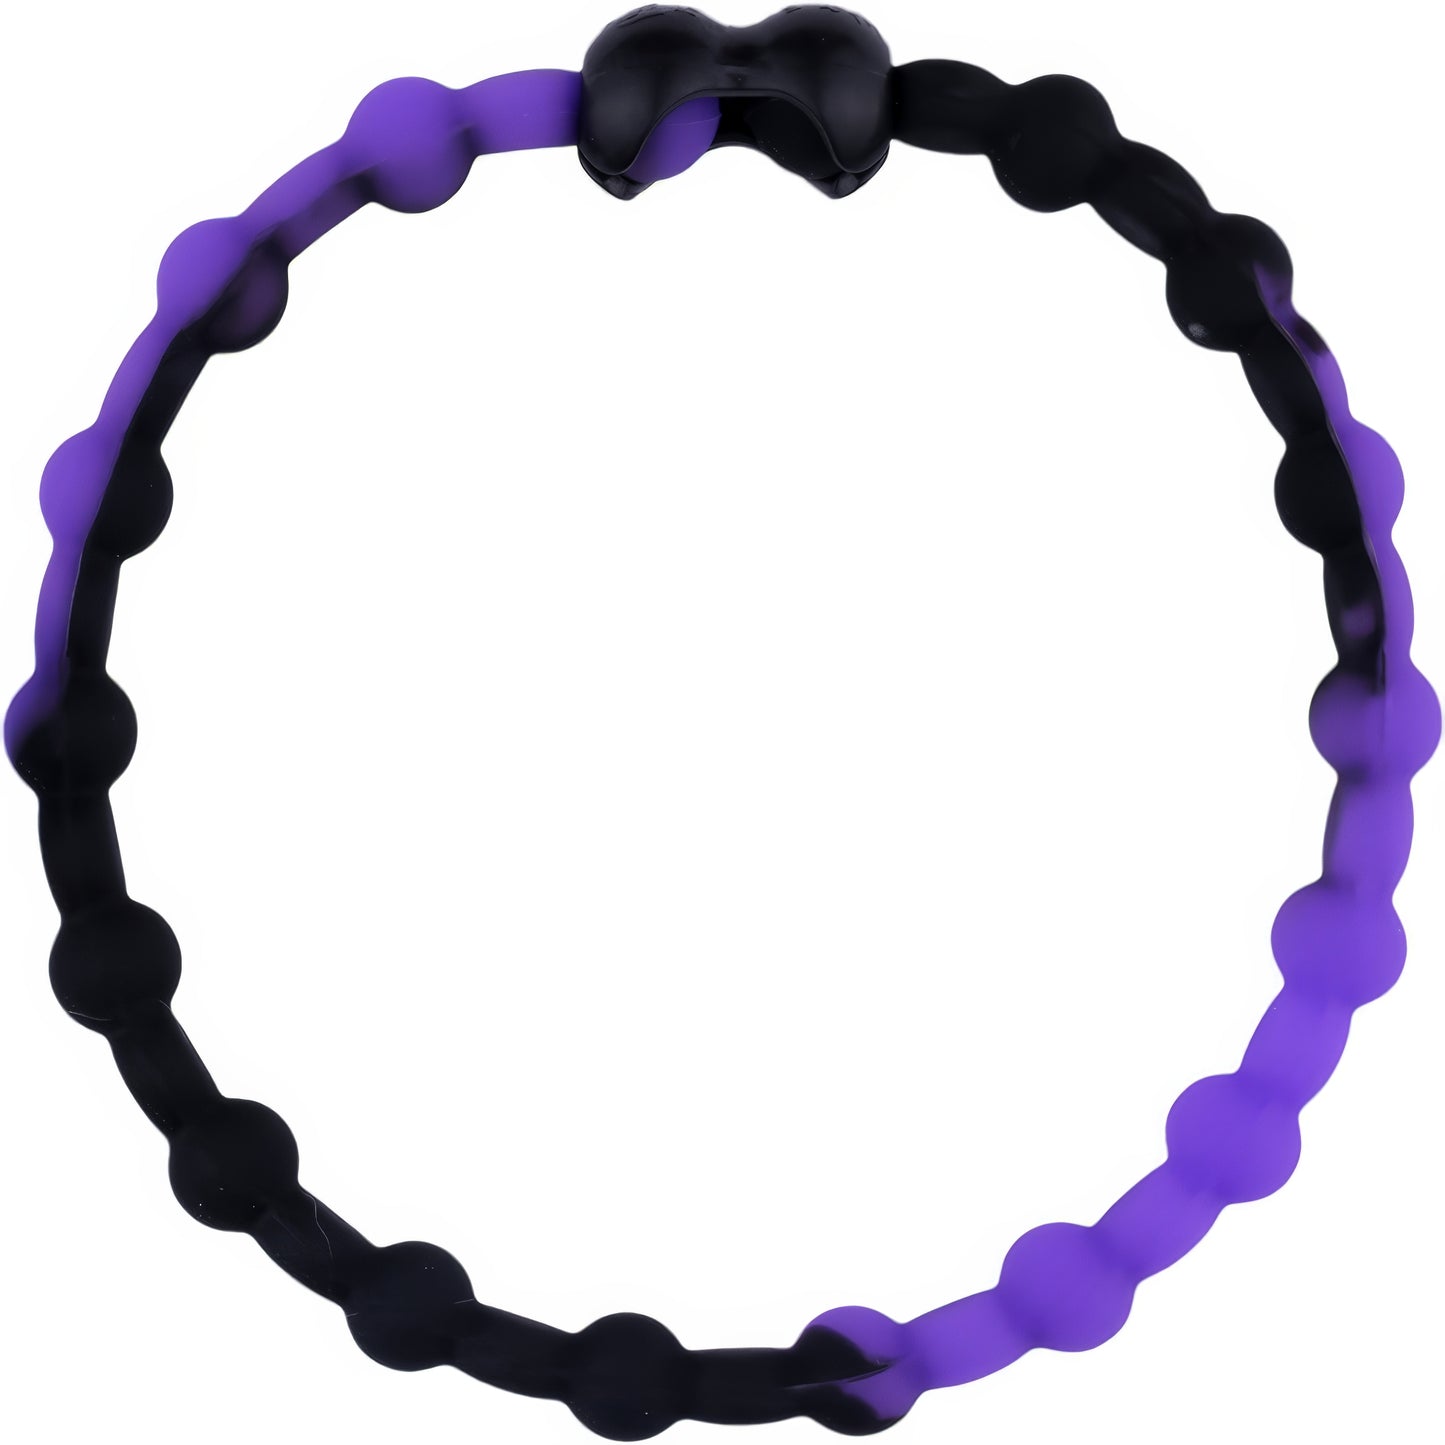 Black & Purple Hair Ties (6-Pack): A Touch of Mystery and Sophistication